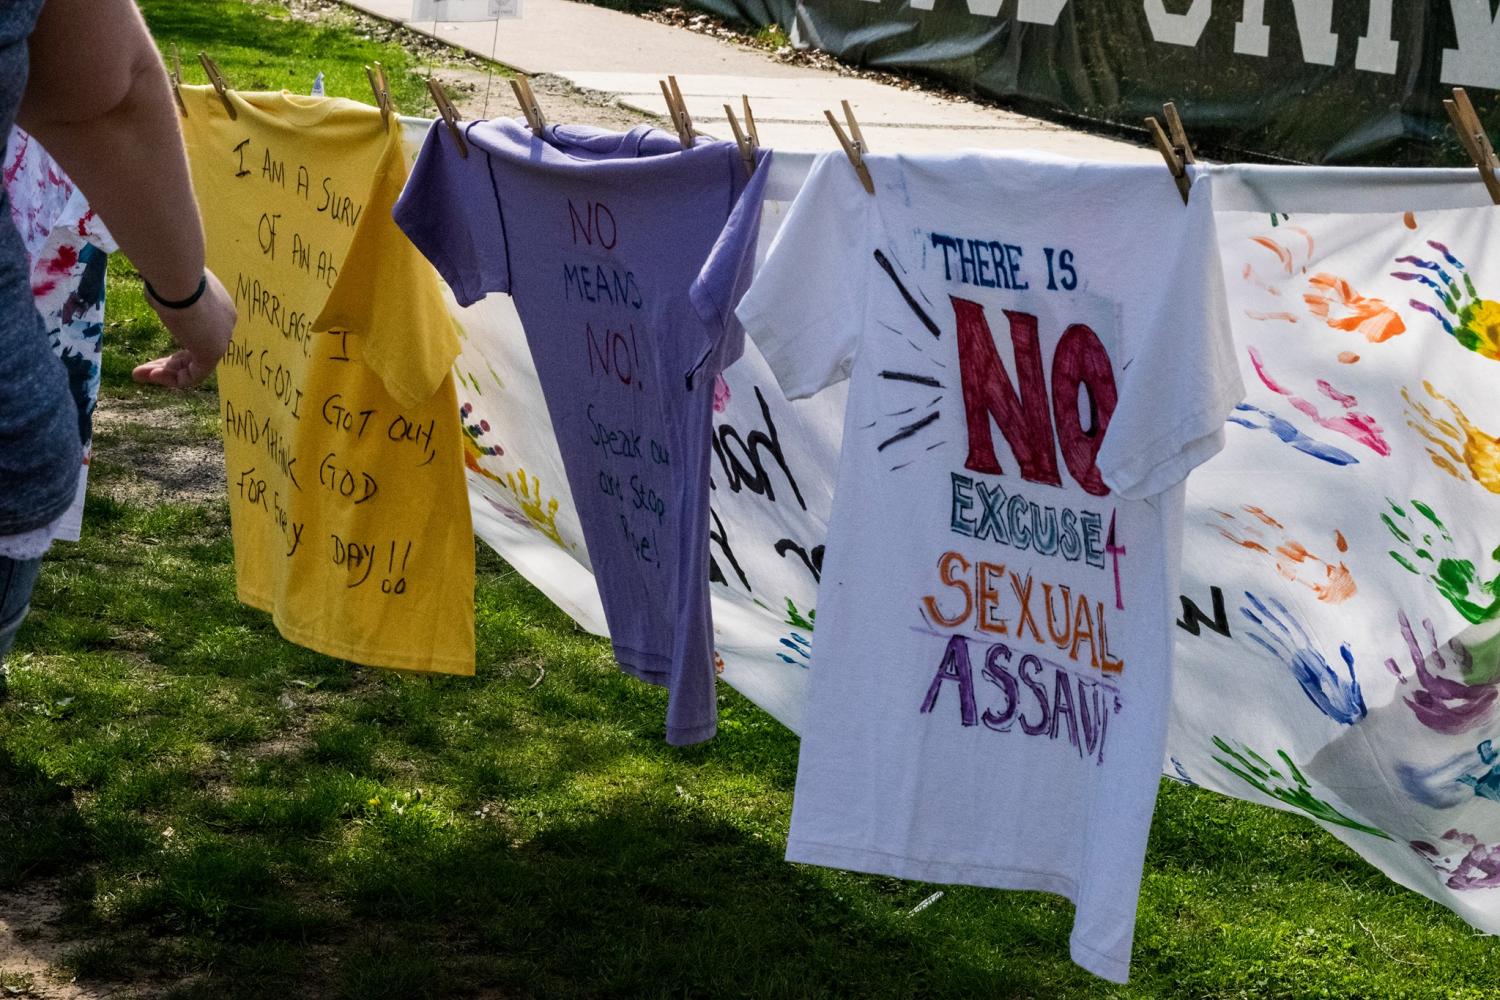 Students designed t-shirts to show solidarity with students of sexual assault.